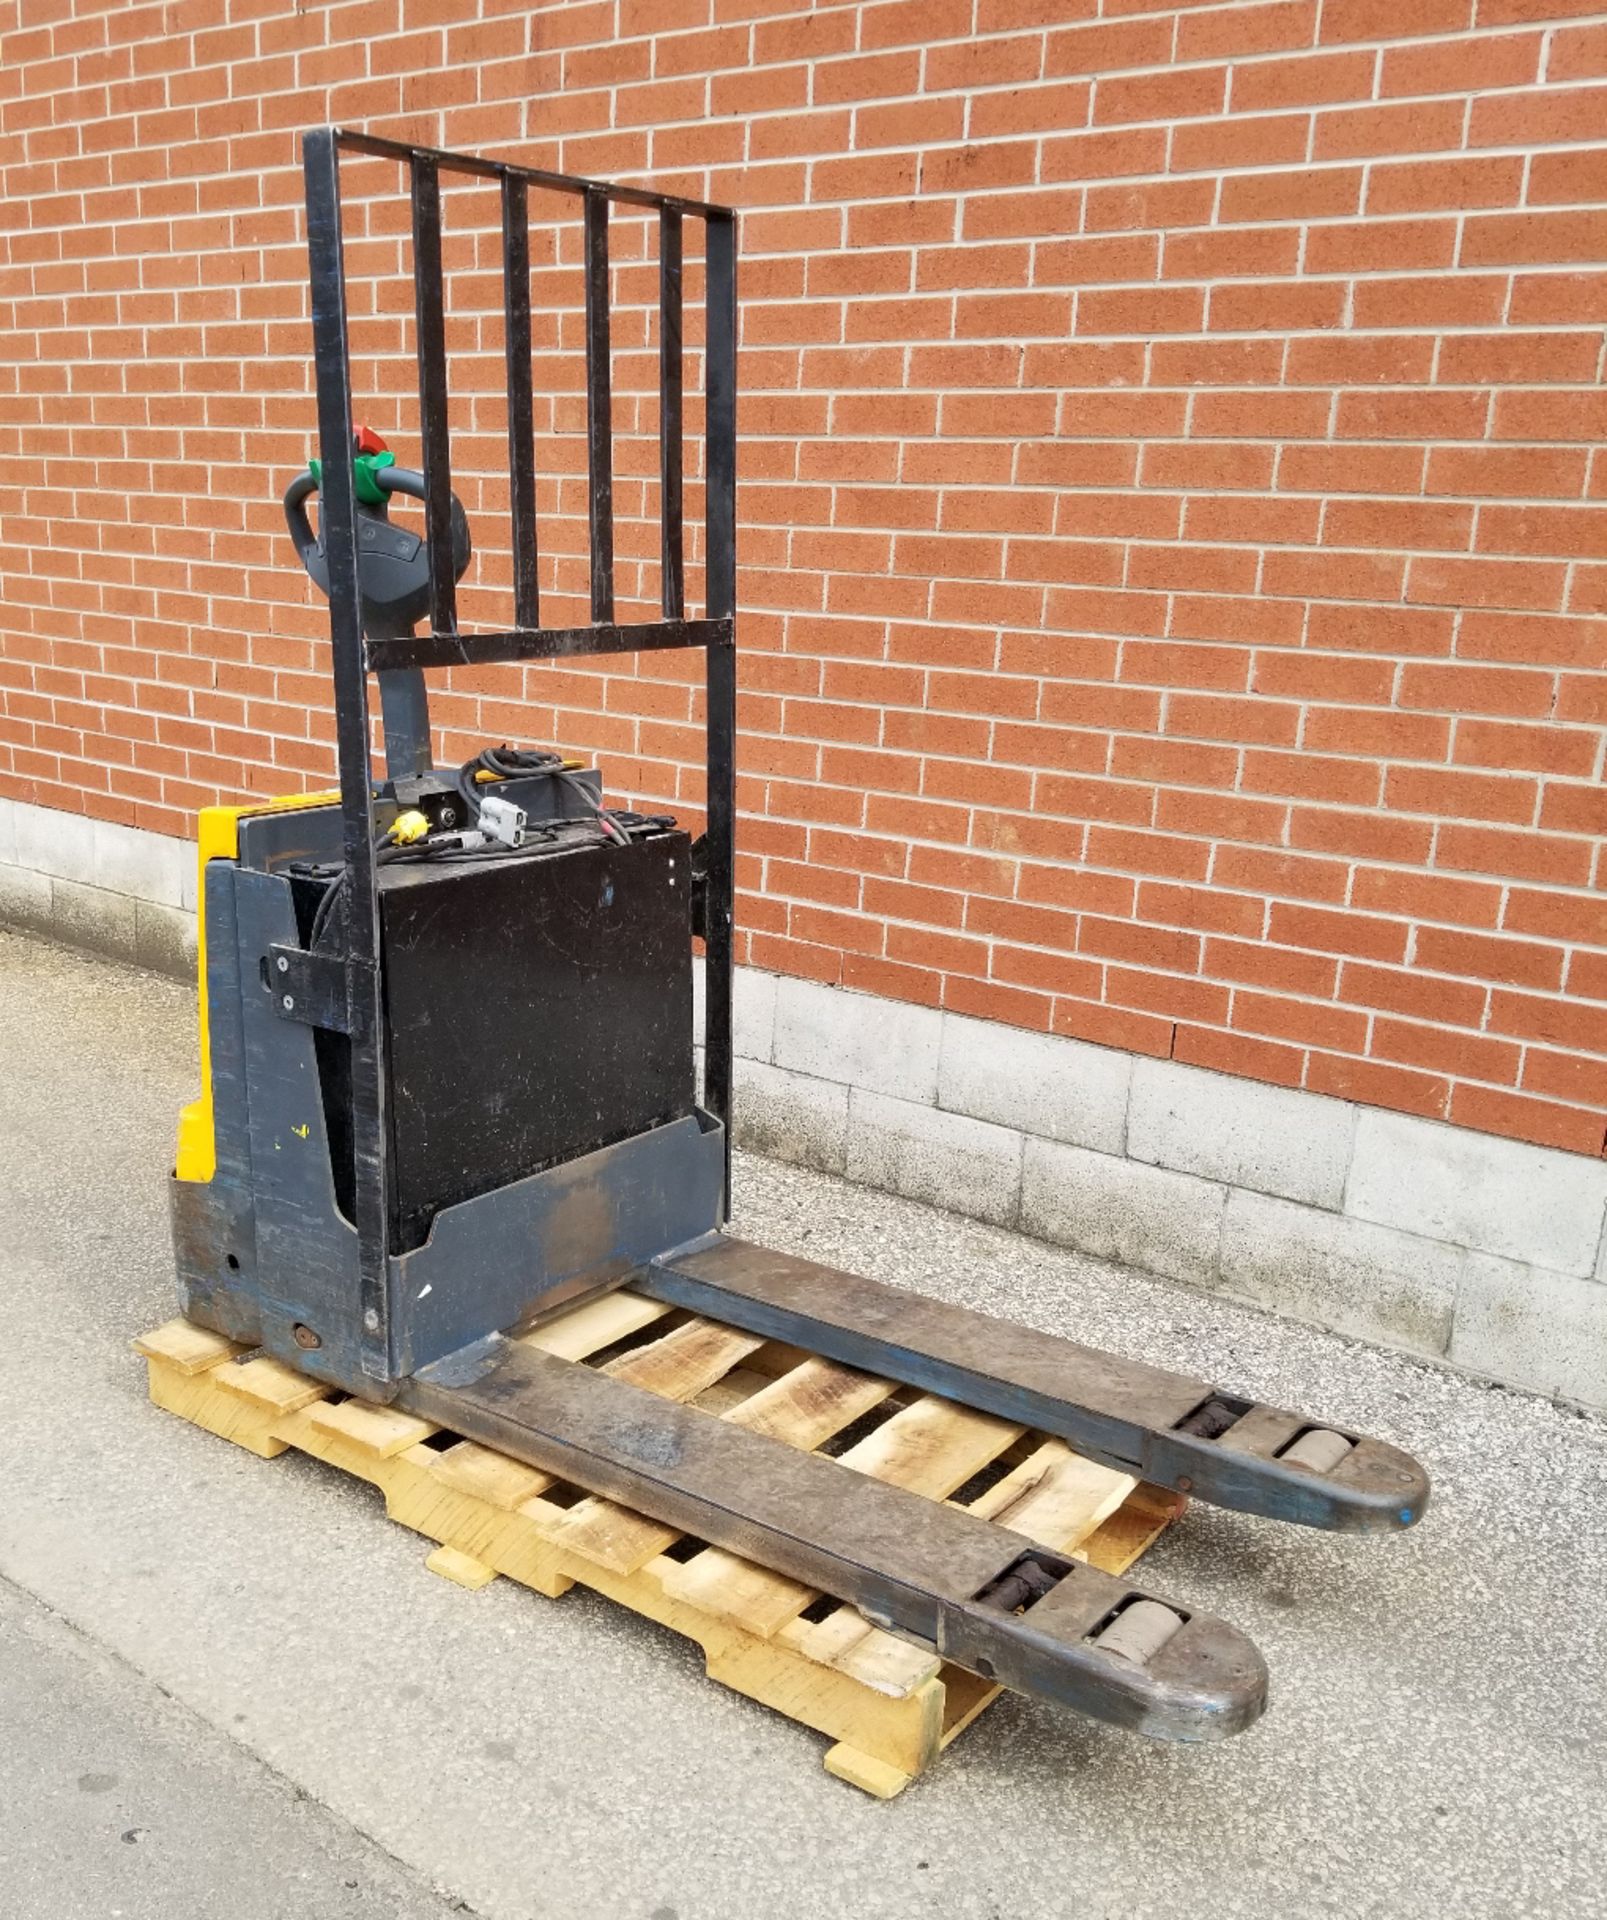 JUNGHEINRICH EJE-120 4500 LB. CAPACITY 24V WALK-BEHIND ELECTRIC PALLET JACK WITH CHARGER, S/N: - Image 2 of 2